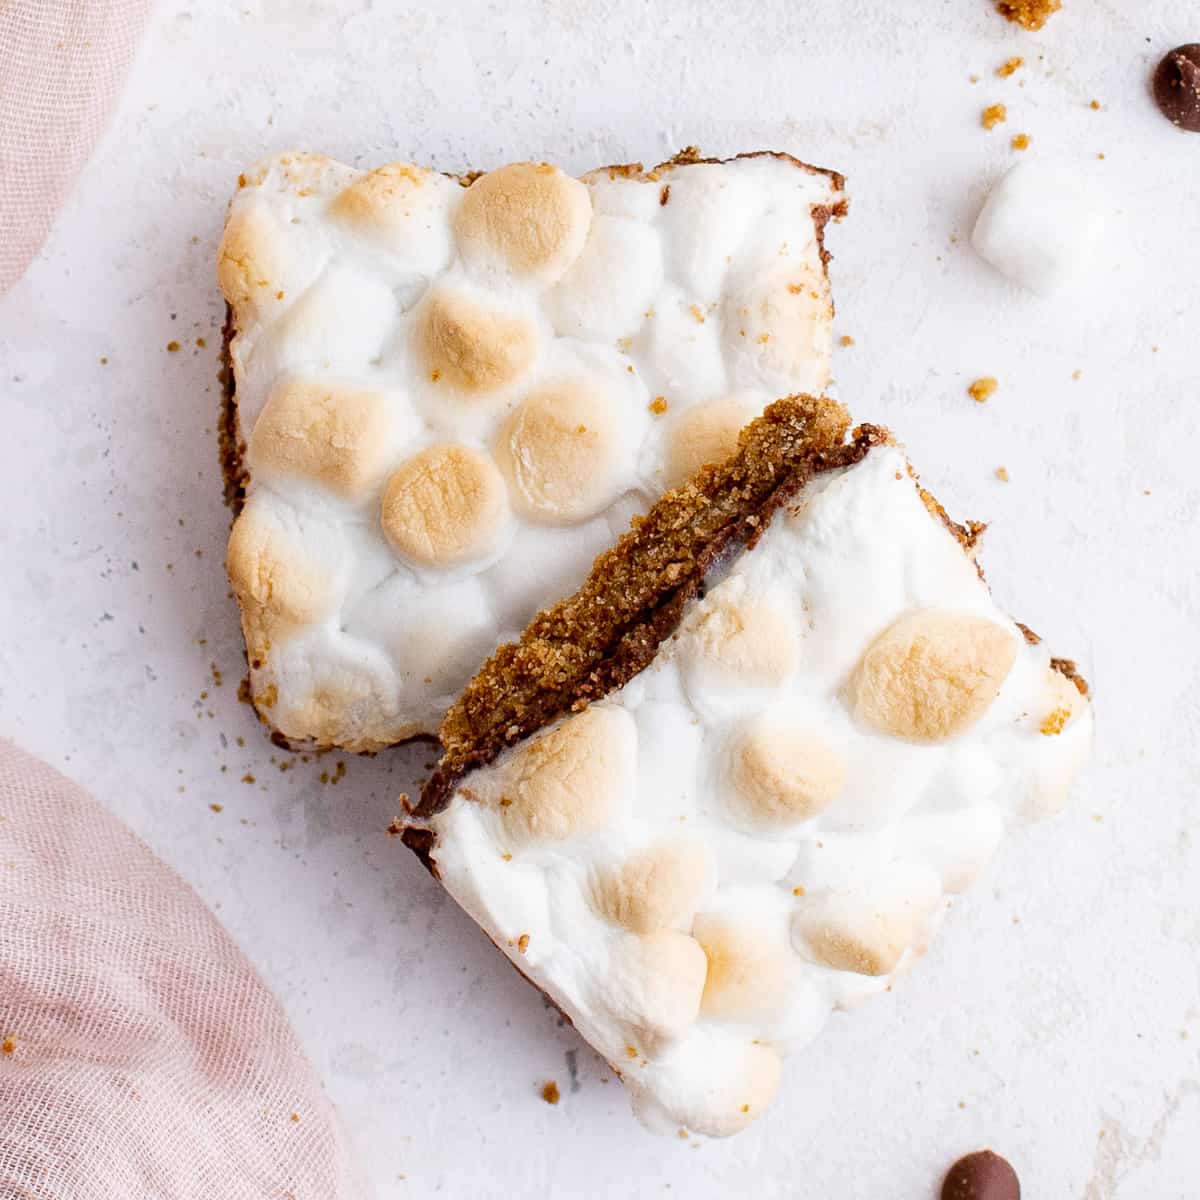 S’mores bars